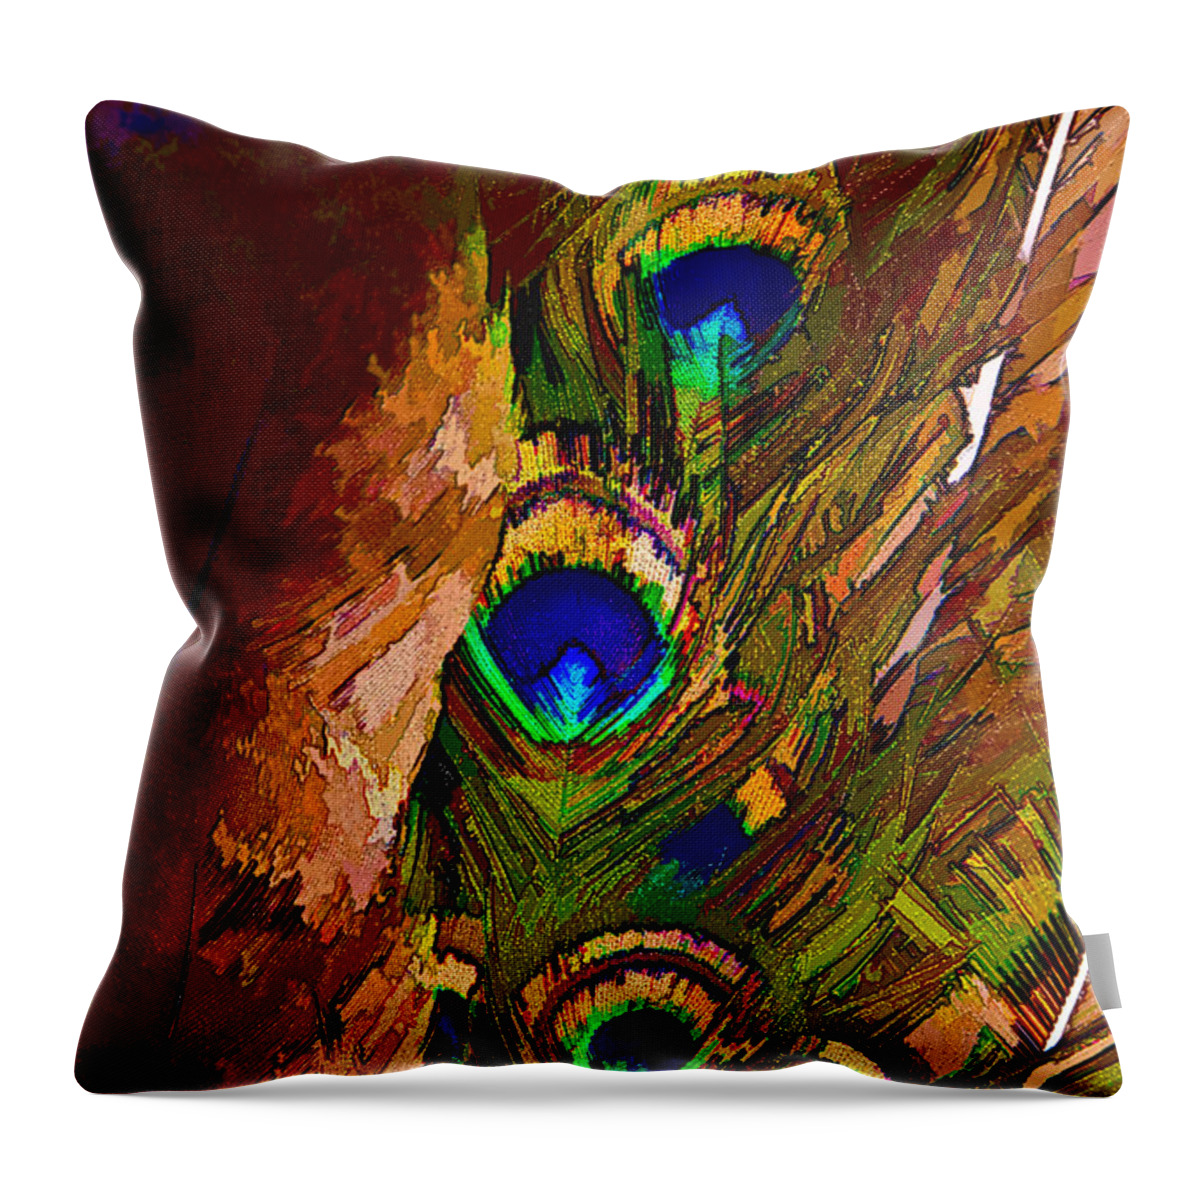 Abstract Throw Pillow featuring the digital art Abstract Peacock by Ches Black